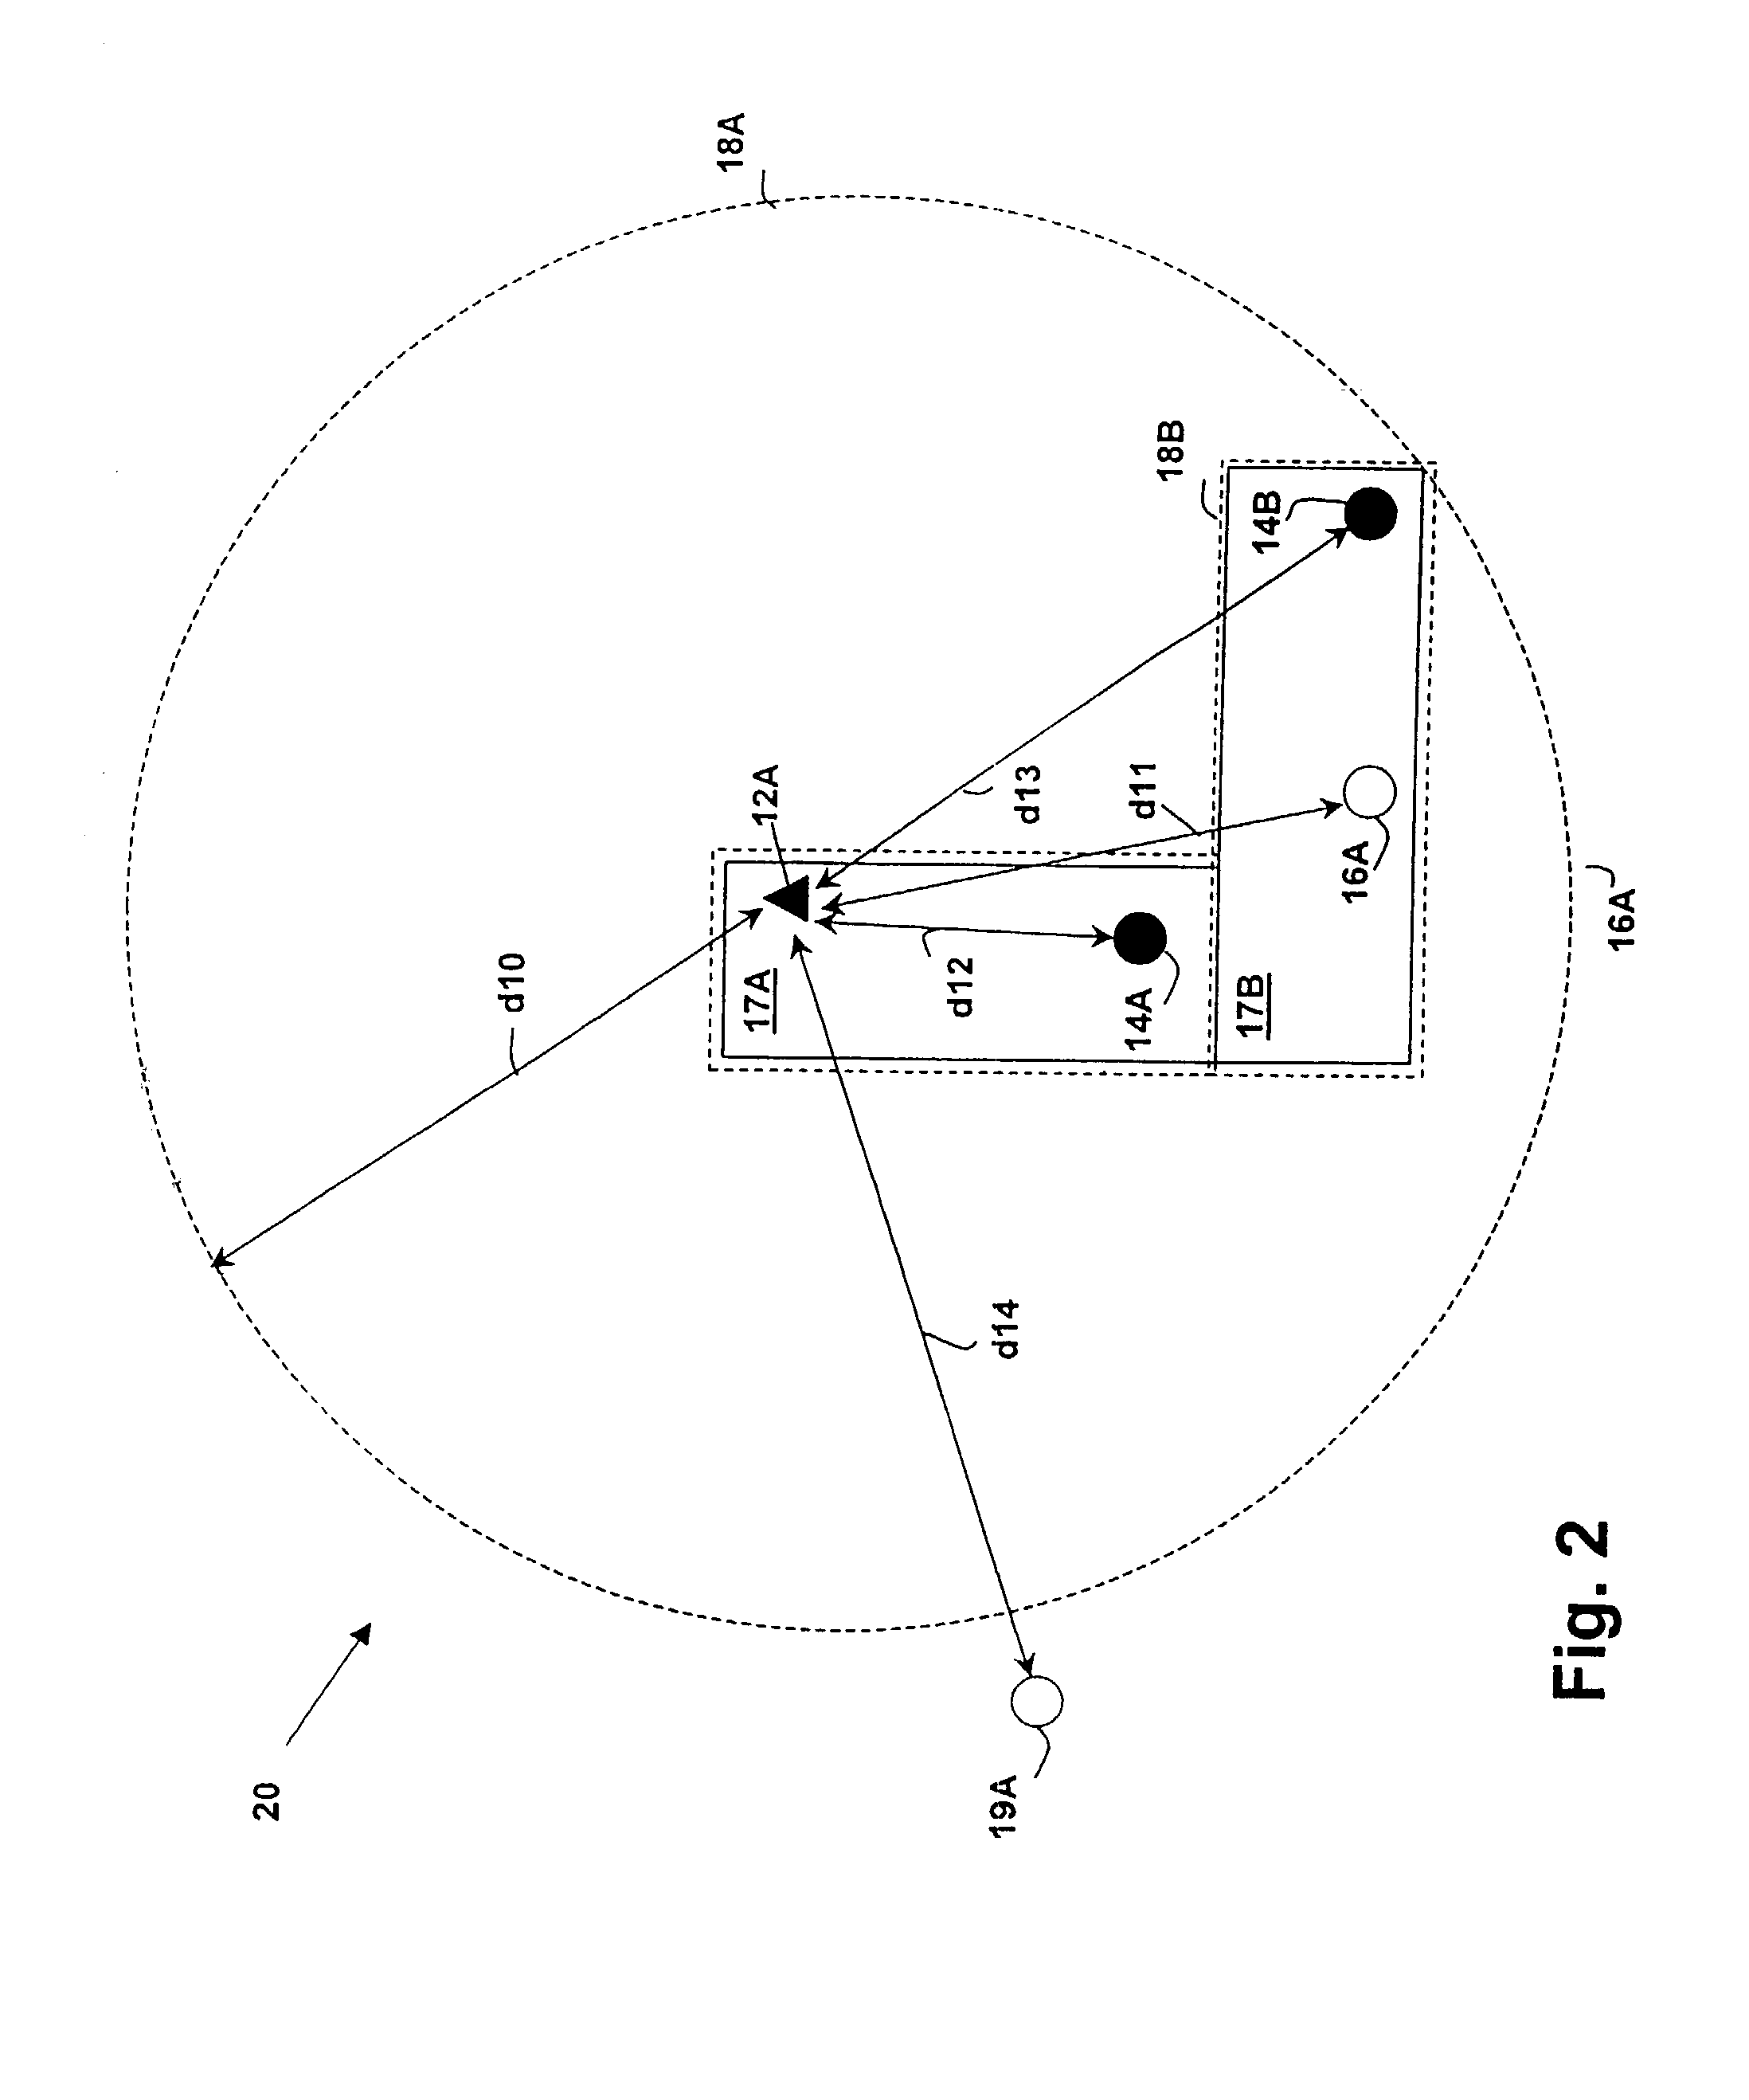 Method and apparatus for enhancing security in a wireless network using distance measurement techniques